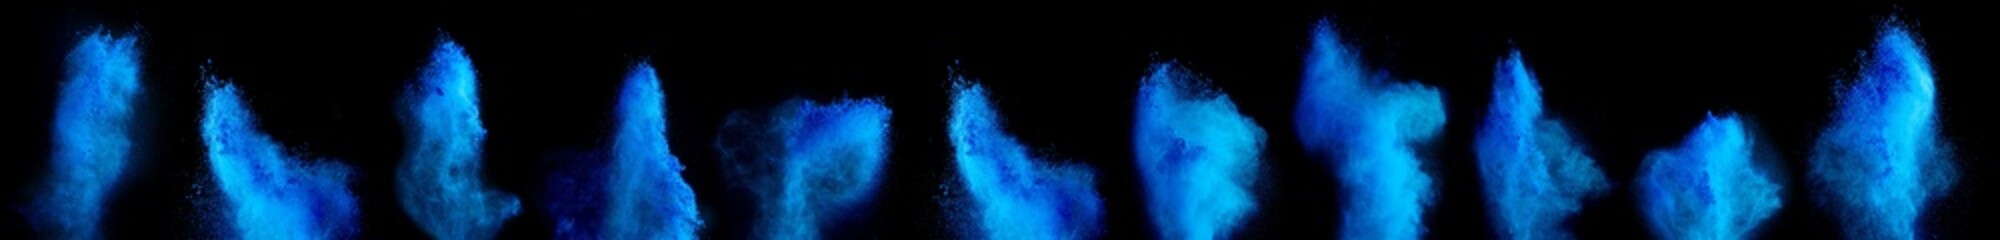 set collection row cyan blue holi paint color powder explosion isolated on dark black background....